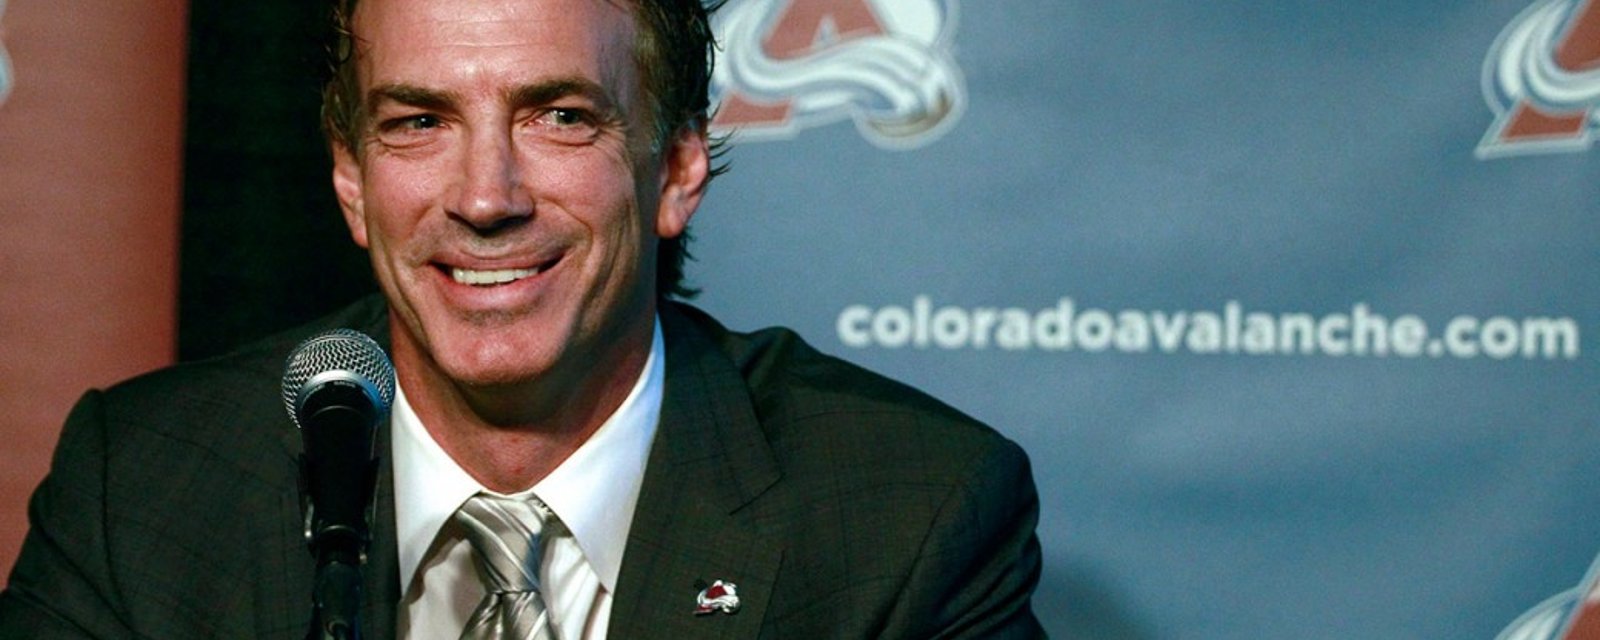 The Colorado Avalanche 4th overall pick revealed.